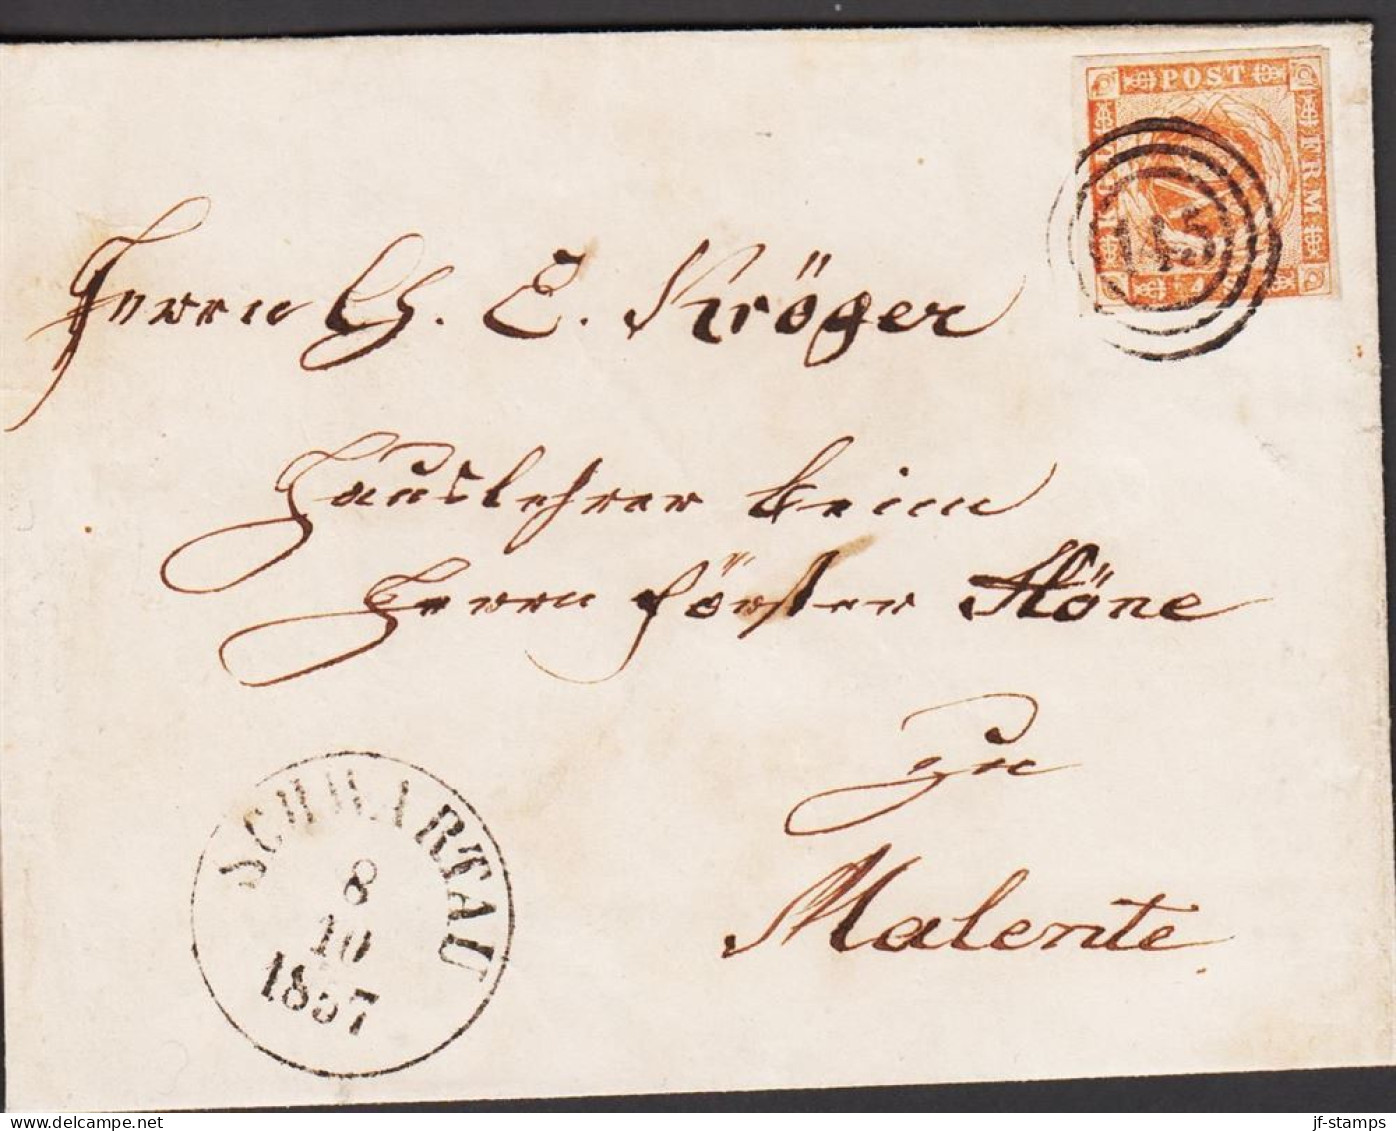 1857. DANMARK 4 Skilling (4th Print) With Very Wide Margins On Wonderful Small Size Envelope To Malente Wi... - JF543825 - Schleswig-Holstein